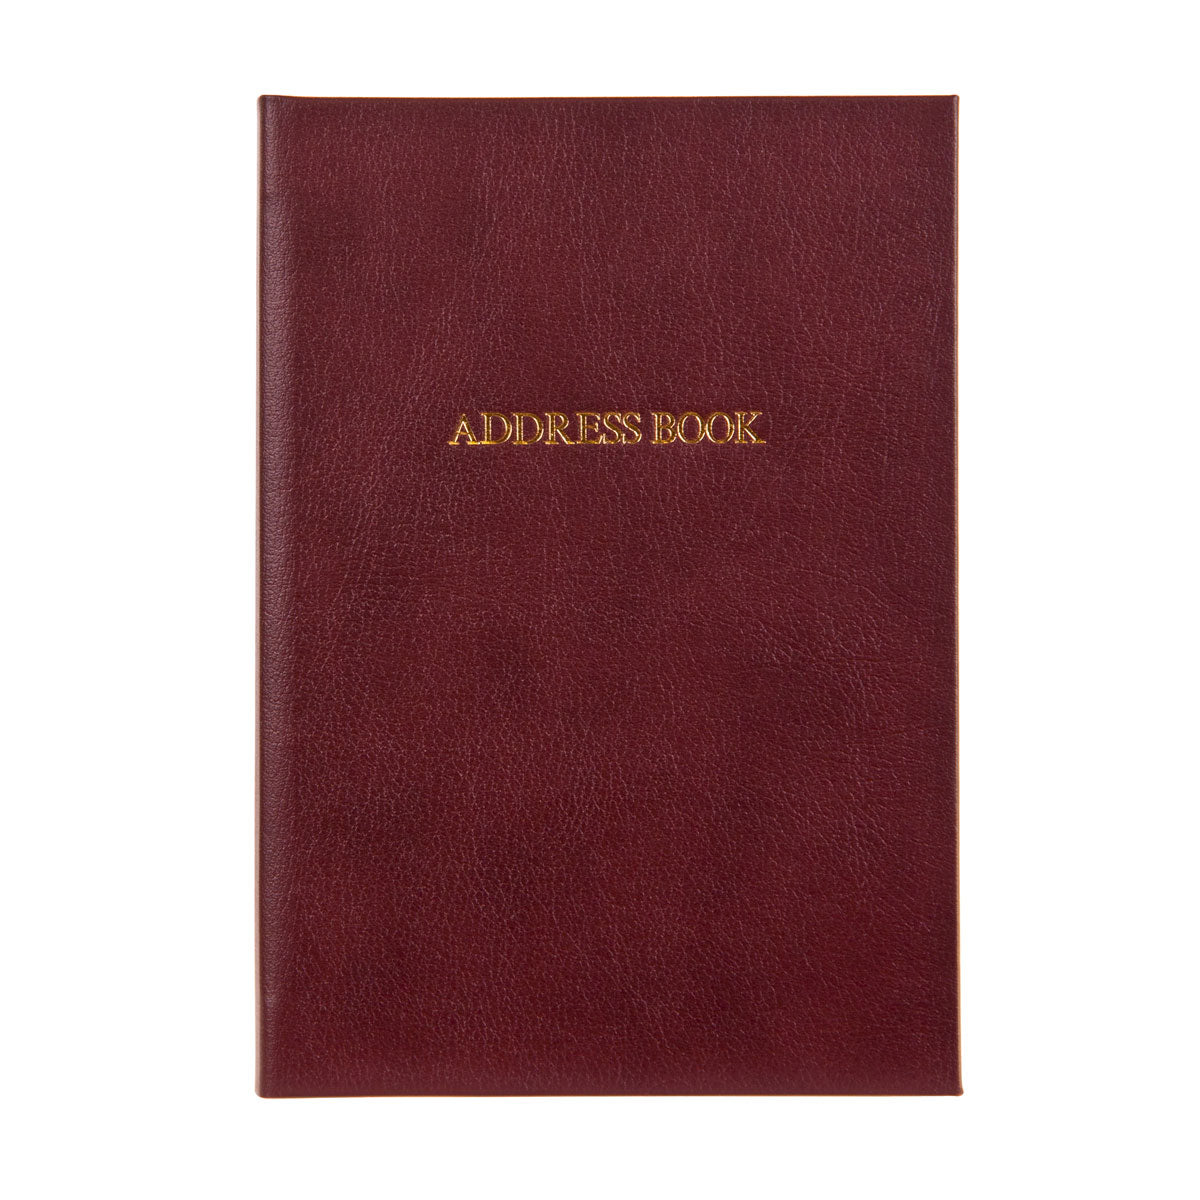 Burgundy Leather Address book with gold embossed title